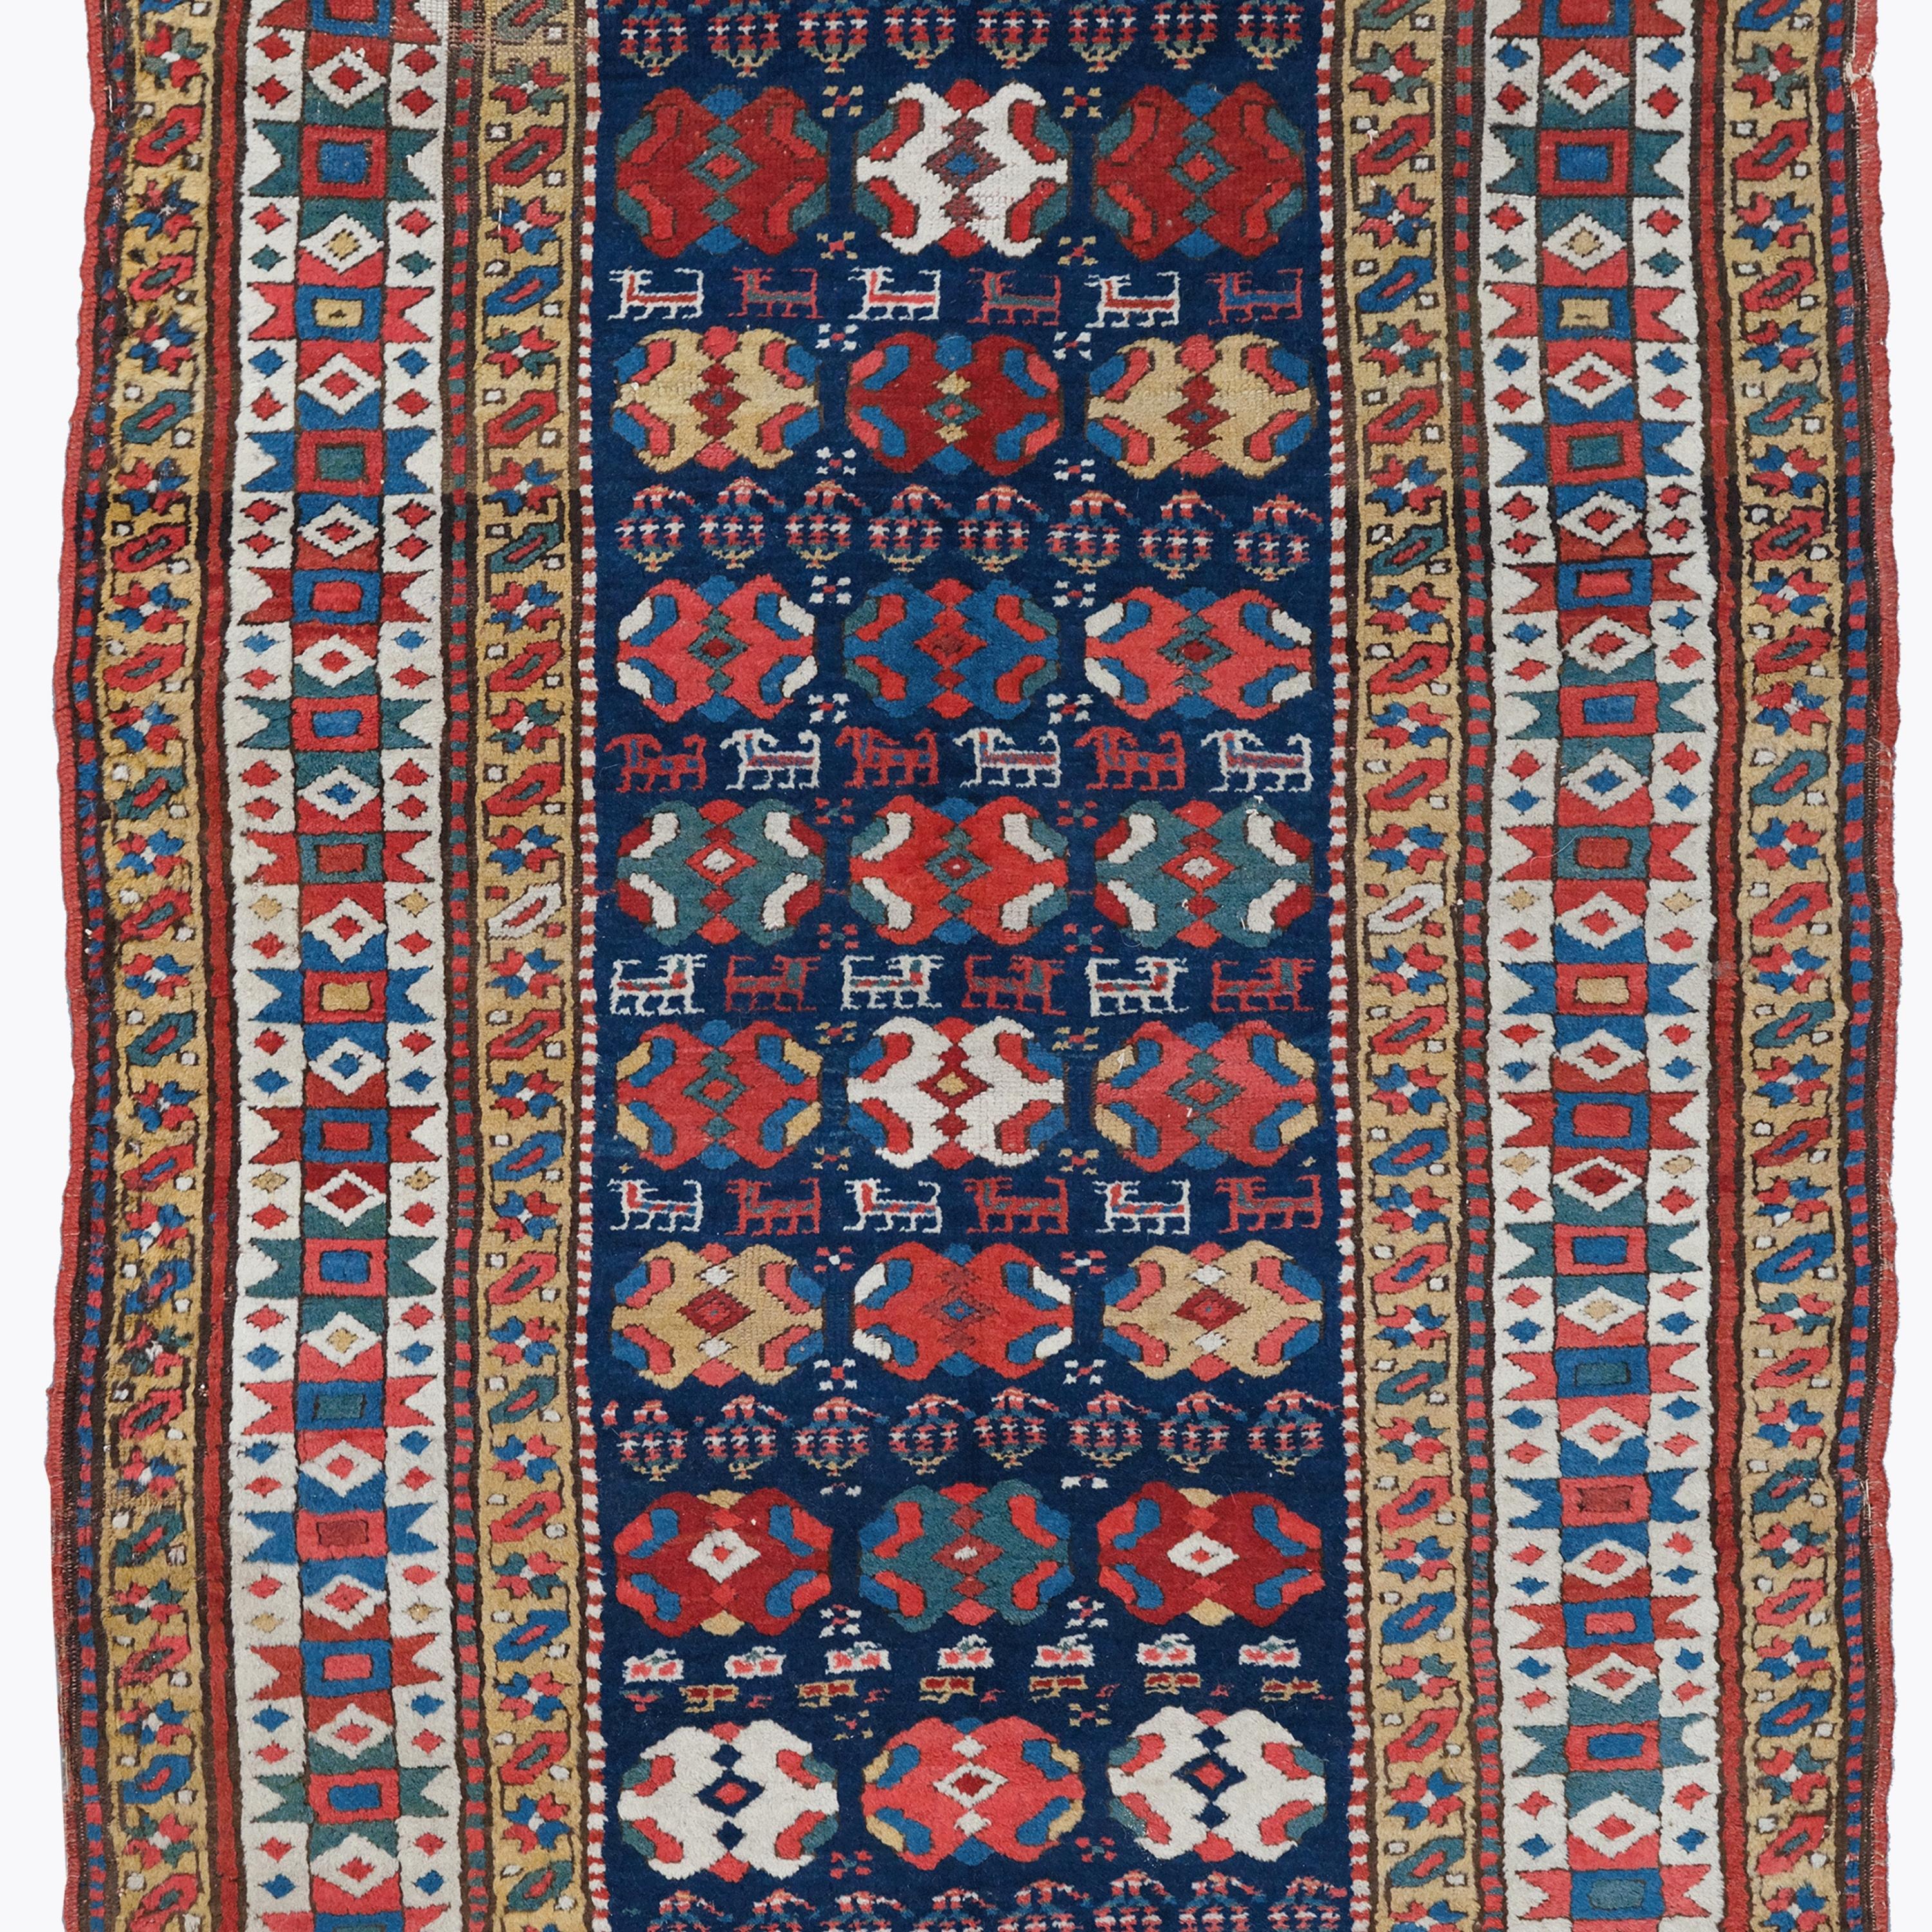 Antique Shahsevan Long Rug - 19th Century Caucasian Shahsevan Long Rug In Good Condition For Sale In Sultanahmet, 34